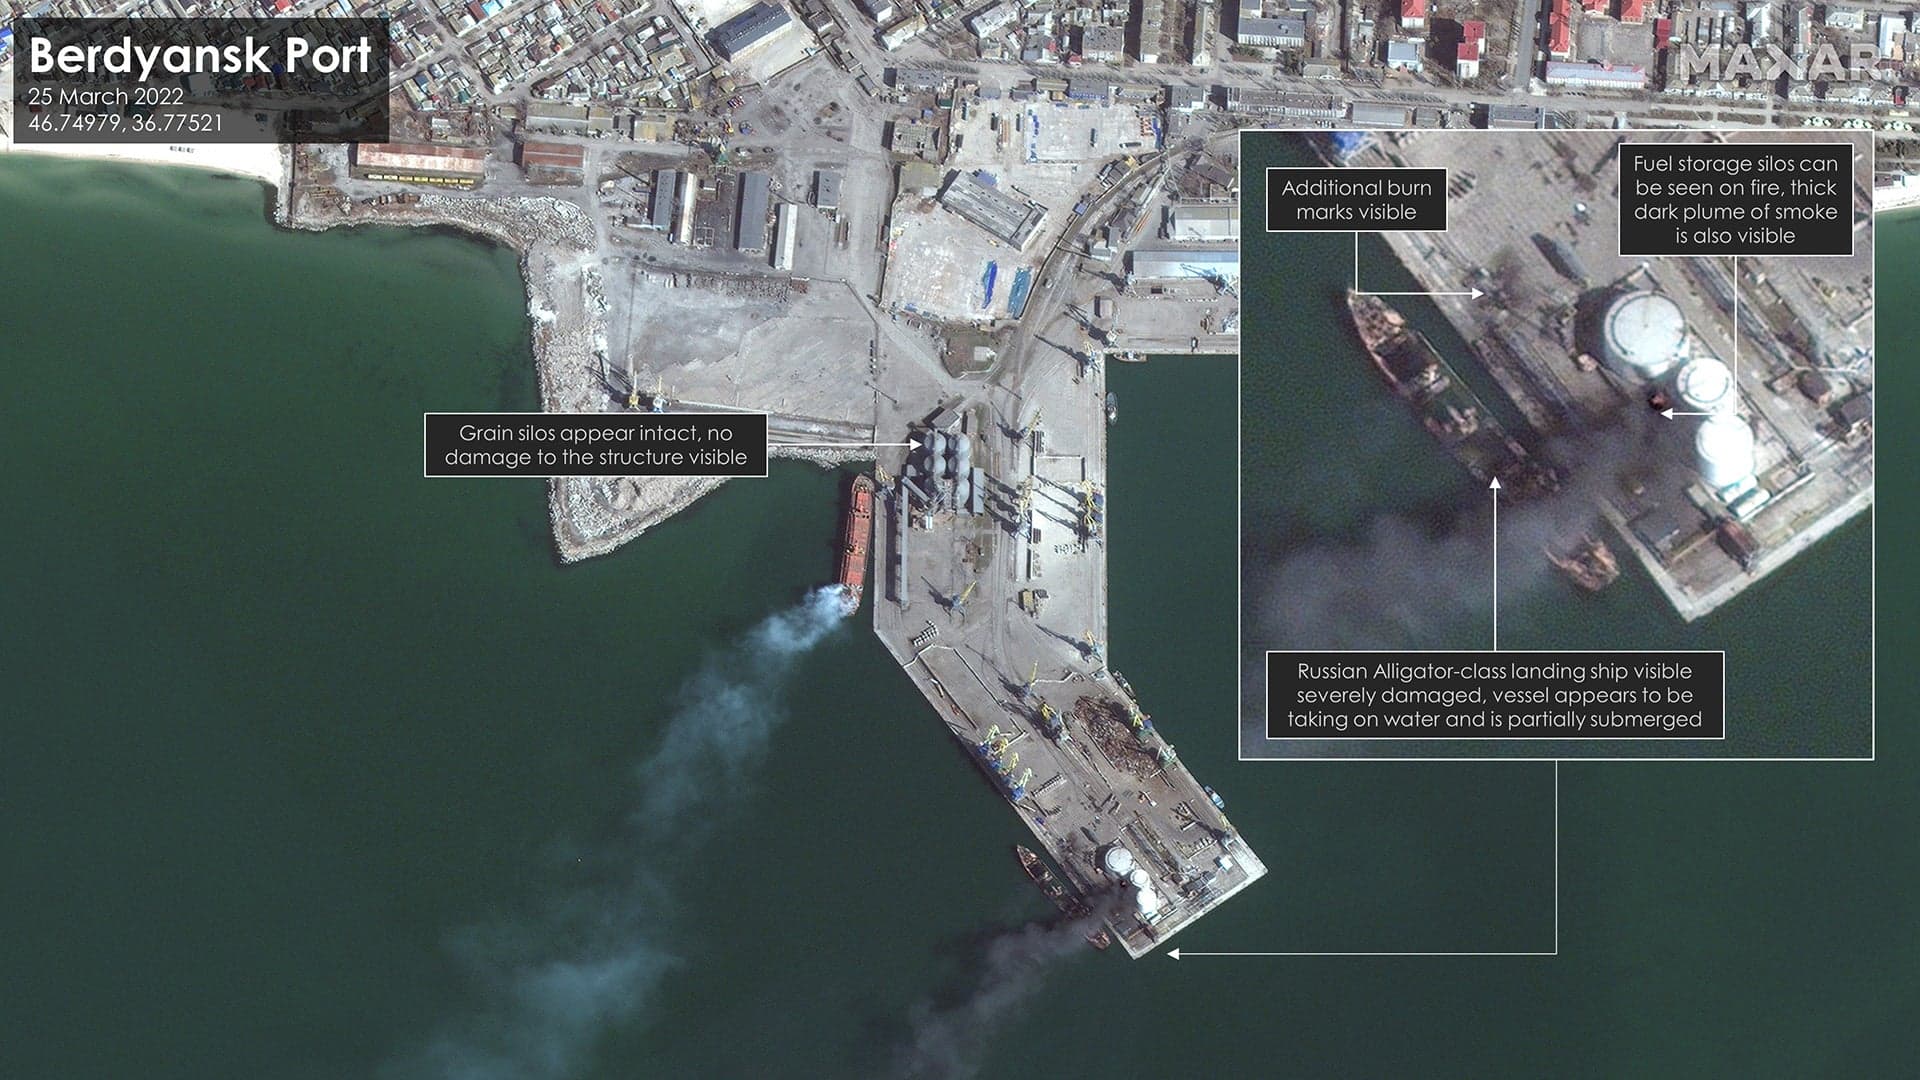 Russian Navy Ship That Exploded In Ukrainian Port Seen Totally Destroyed In Satellite Image